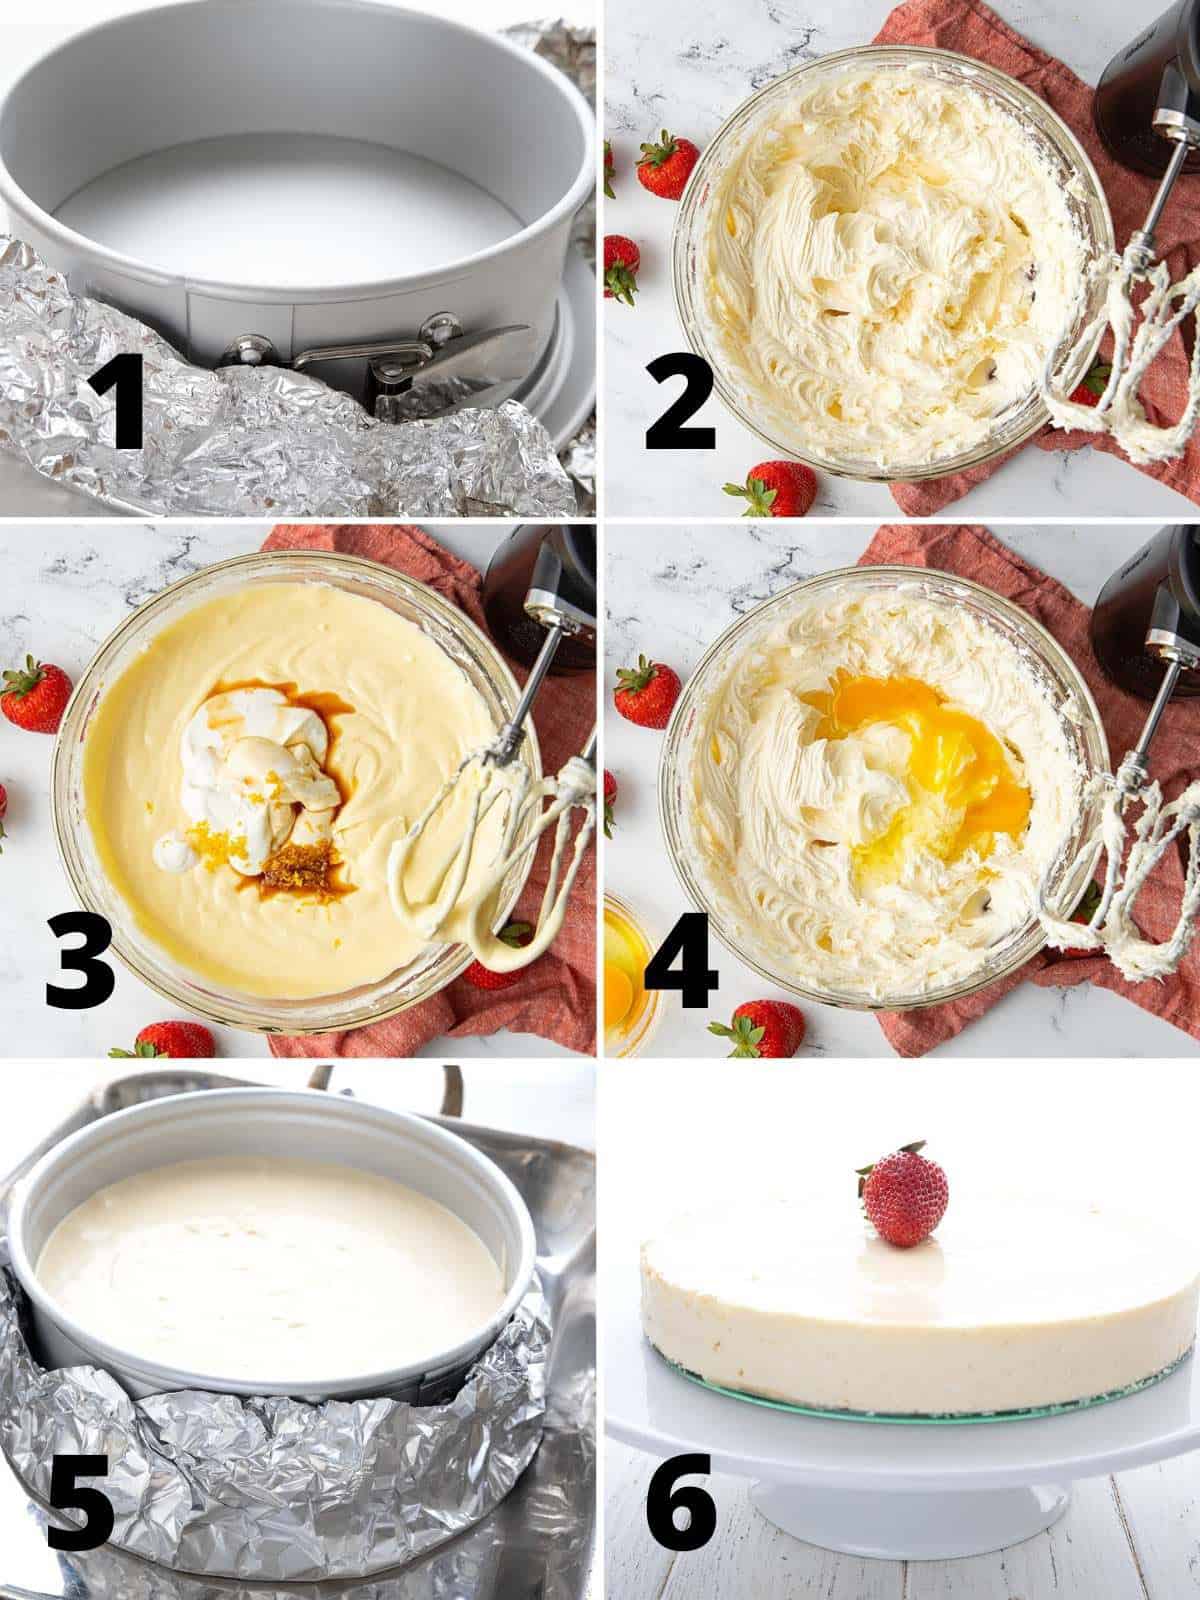 A collage of 6 images showing how to make Keto Cheesecake. 